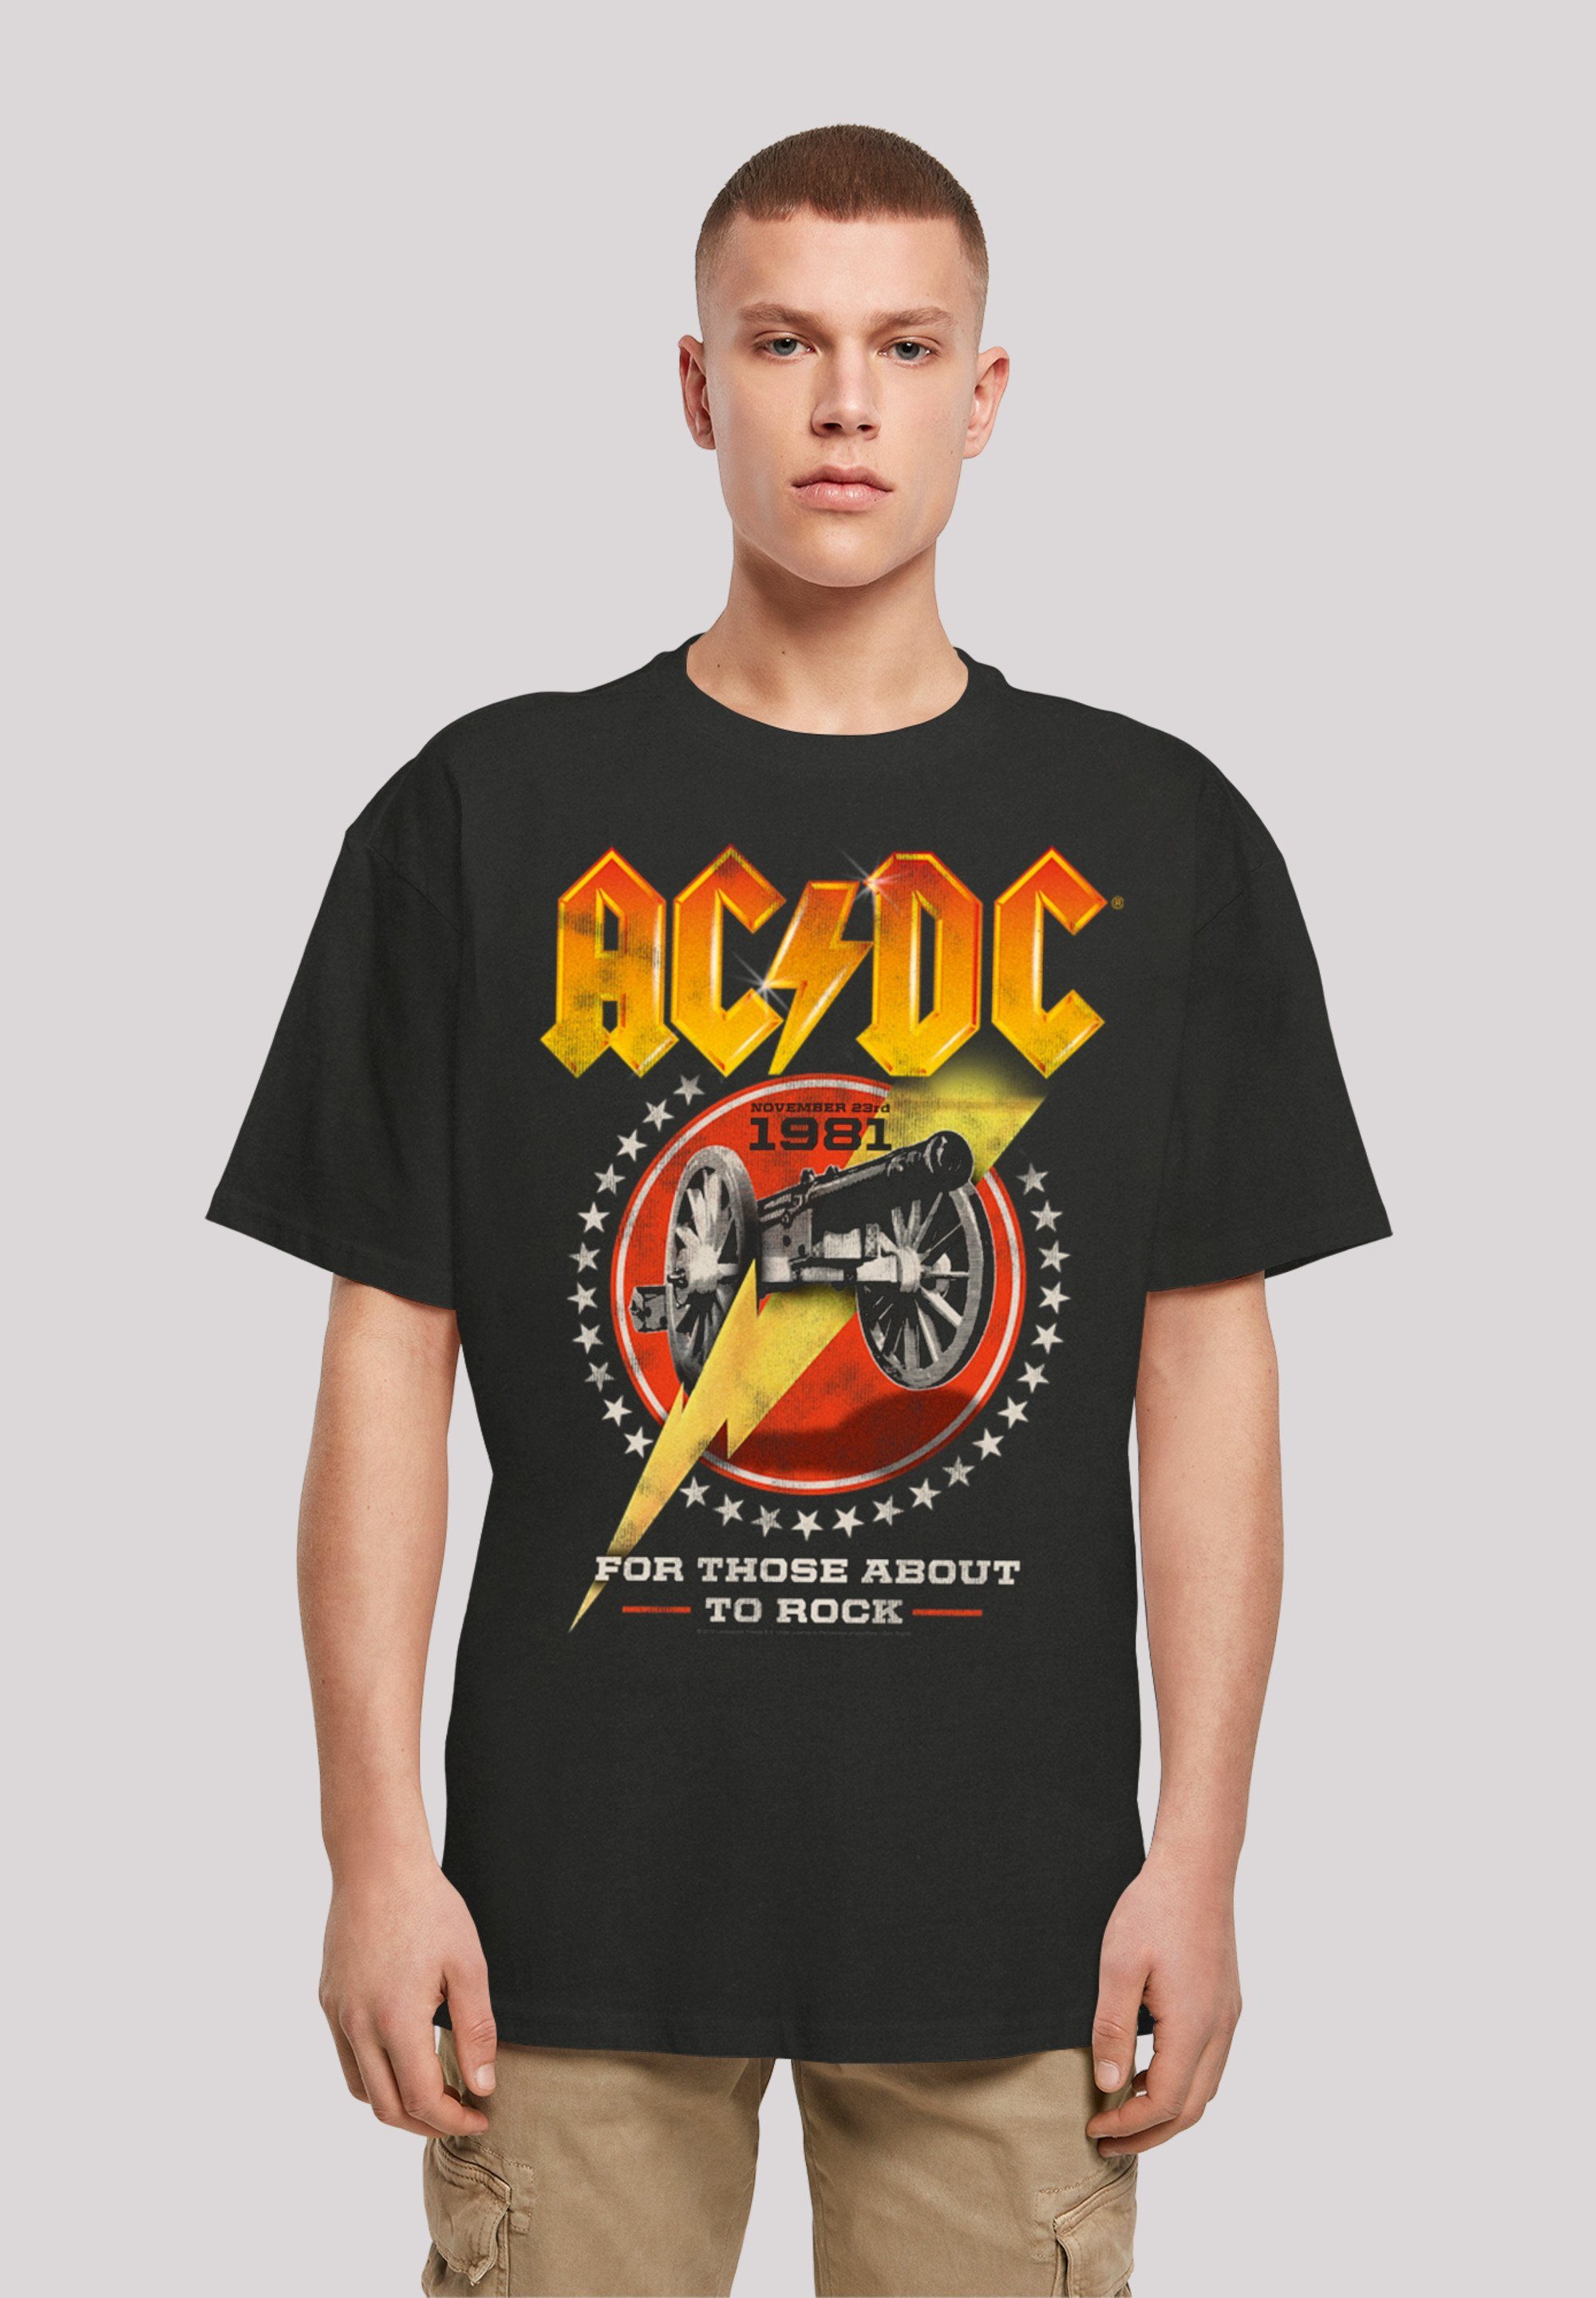 F4NT4STIC T-Shirt ACDC Rock Band Shirt For Those About To Rock 1981 Print schwarz